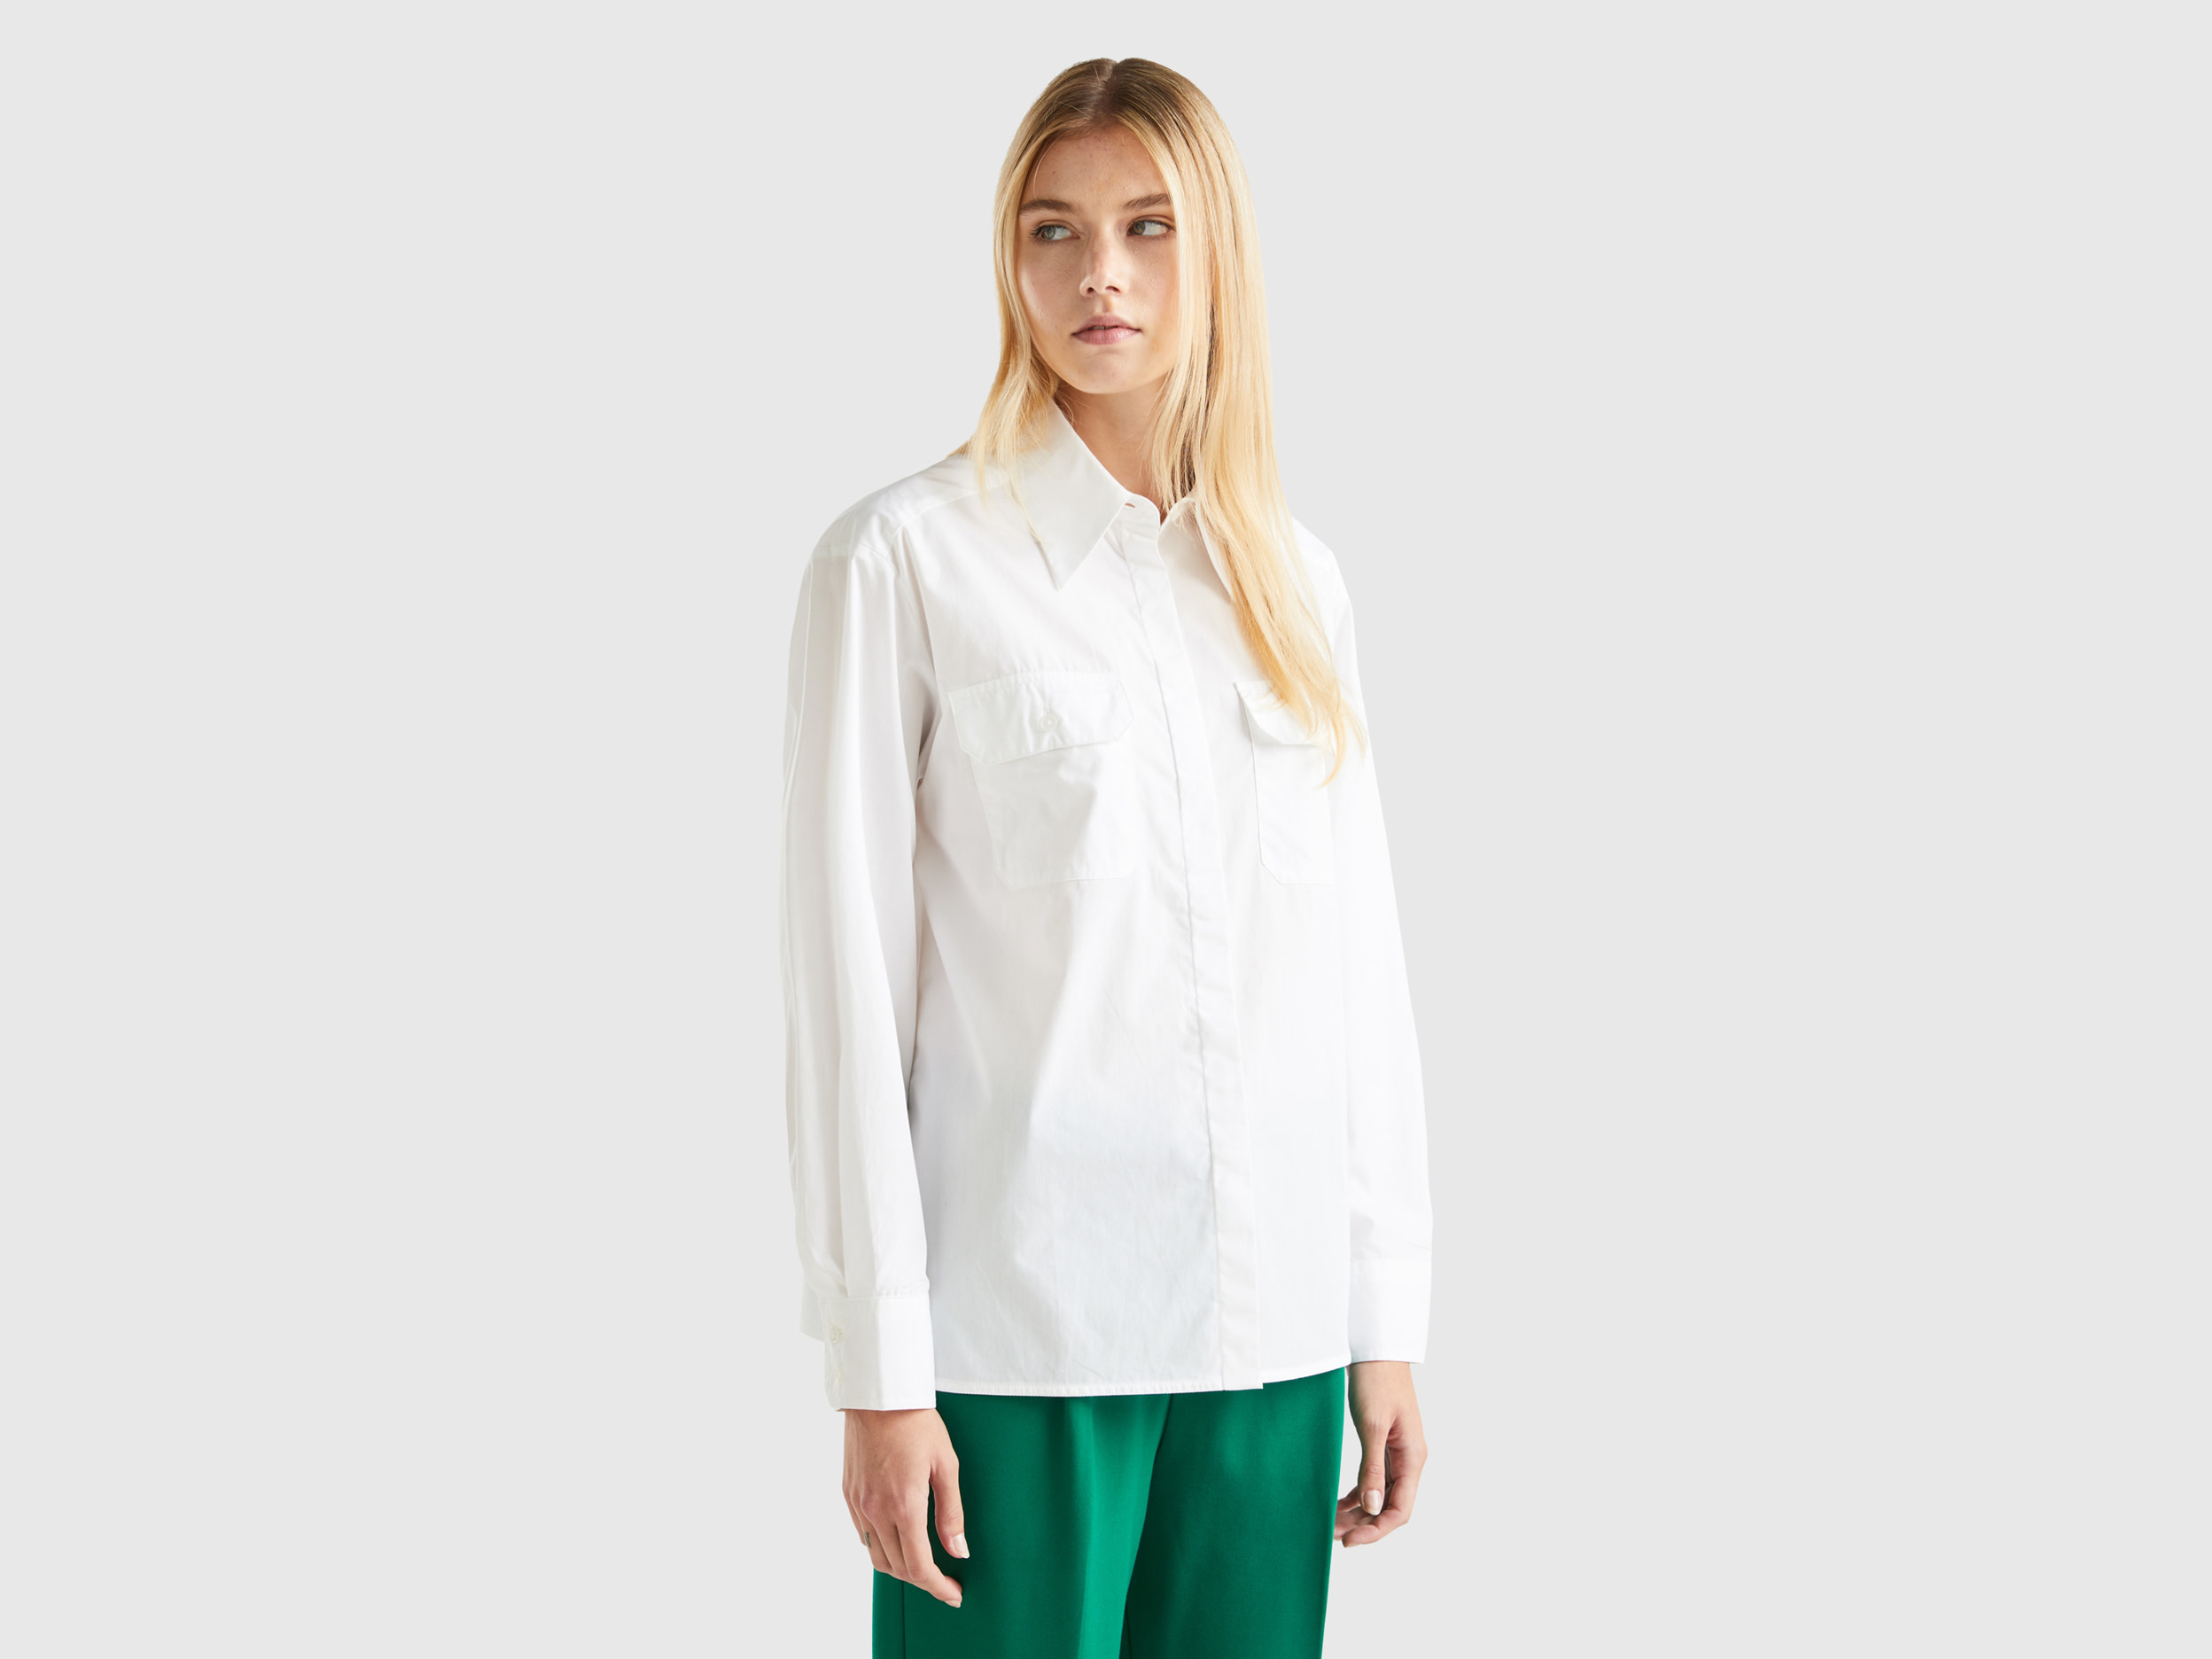 Benetton, Shirt With Pockets And Slits, size L, White, Women